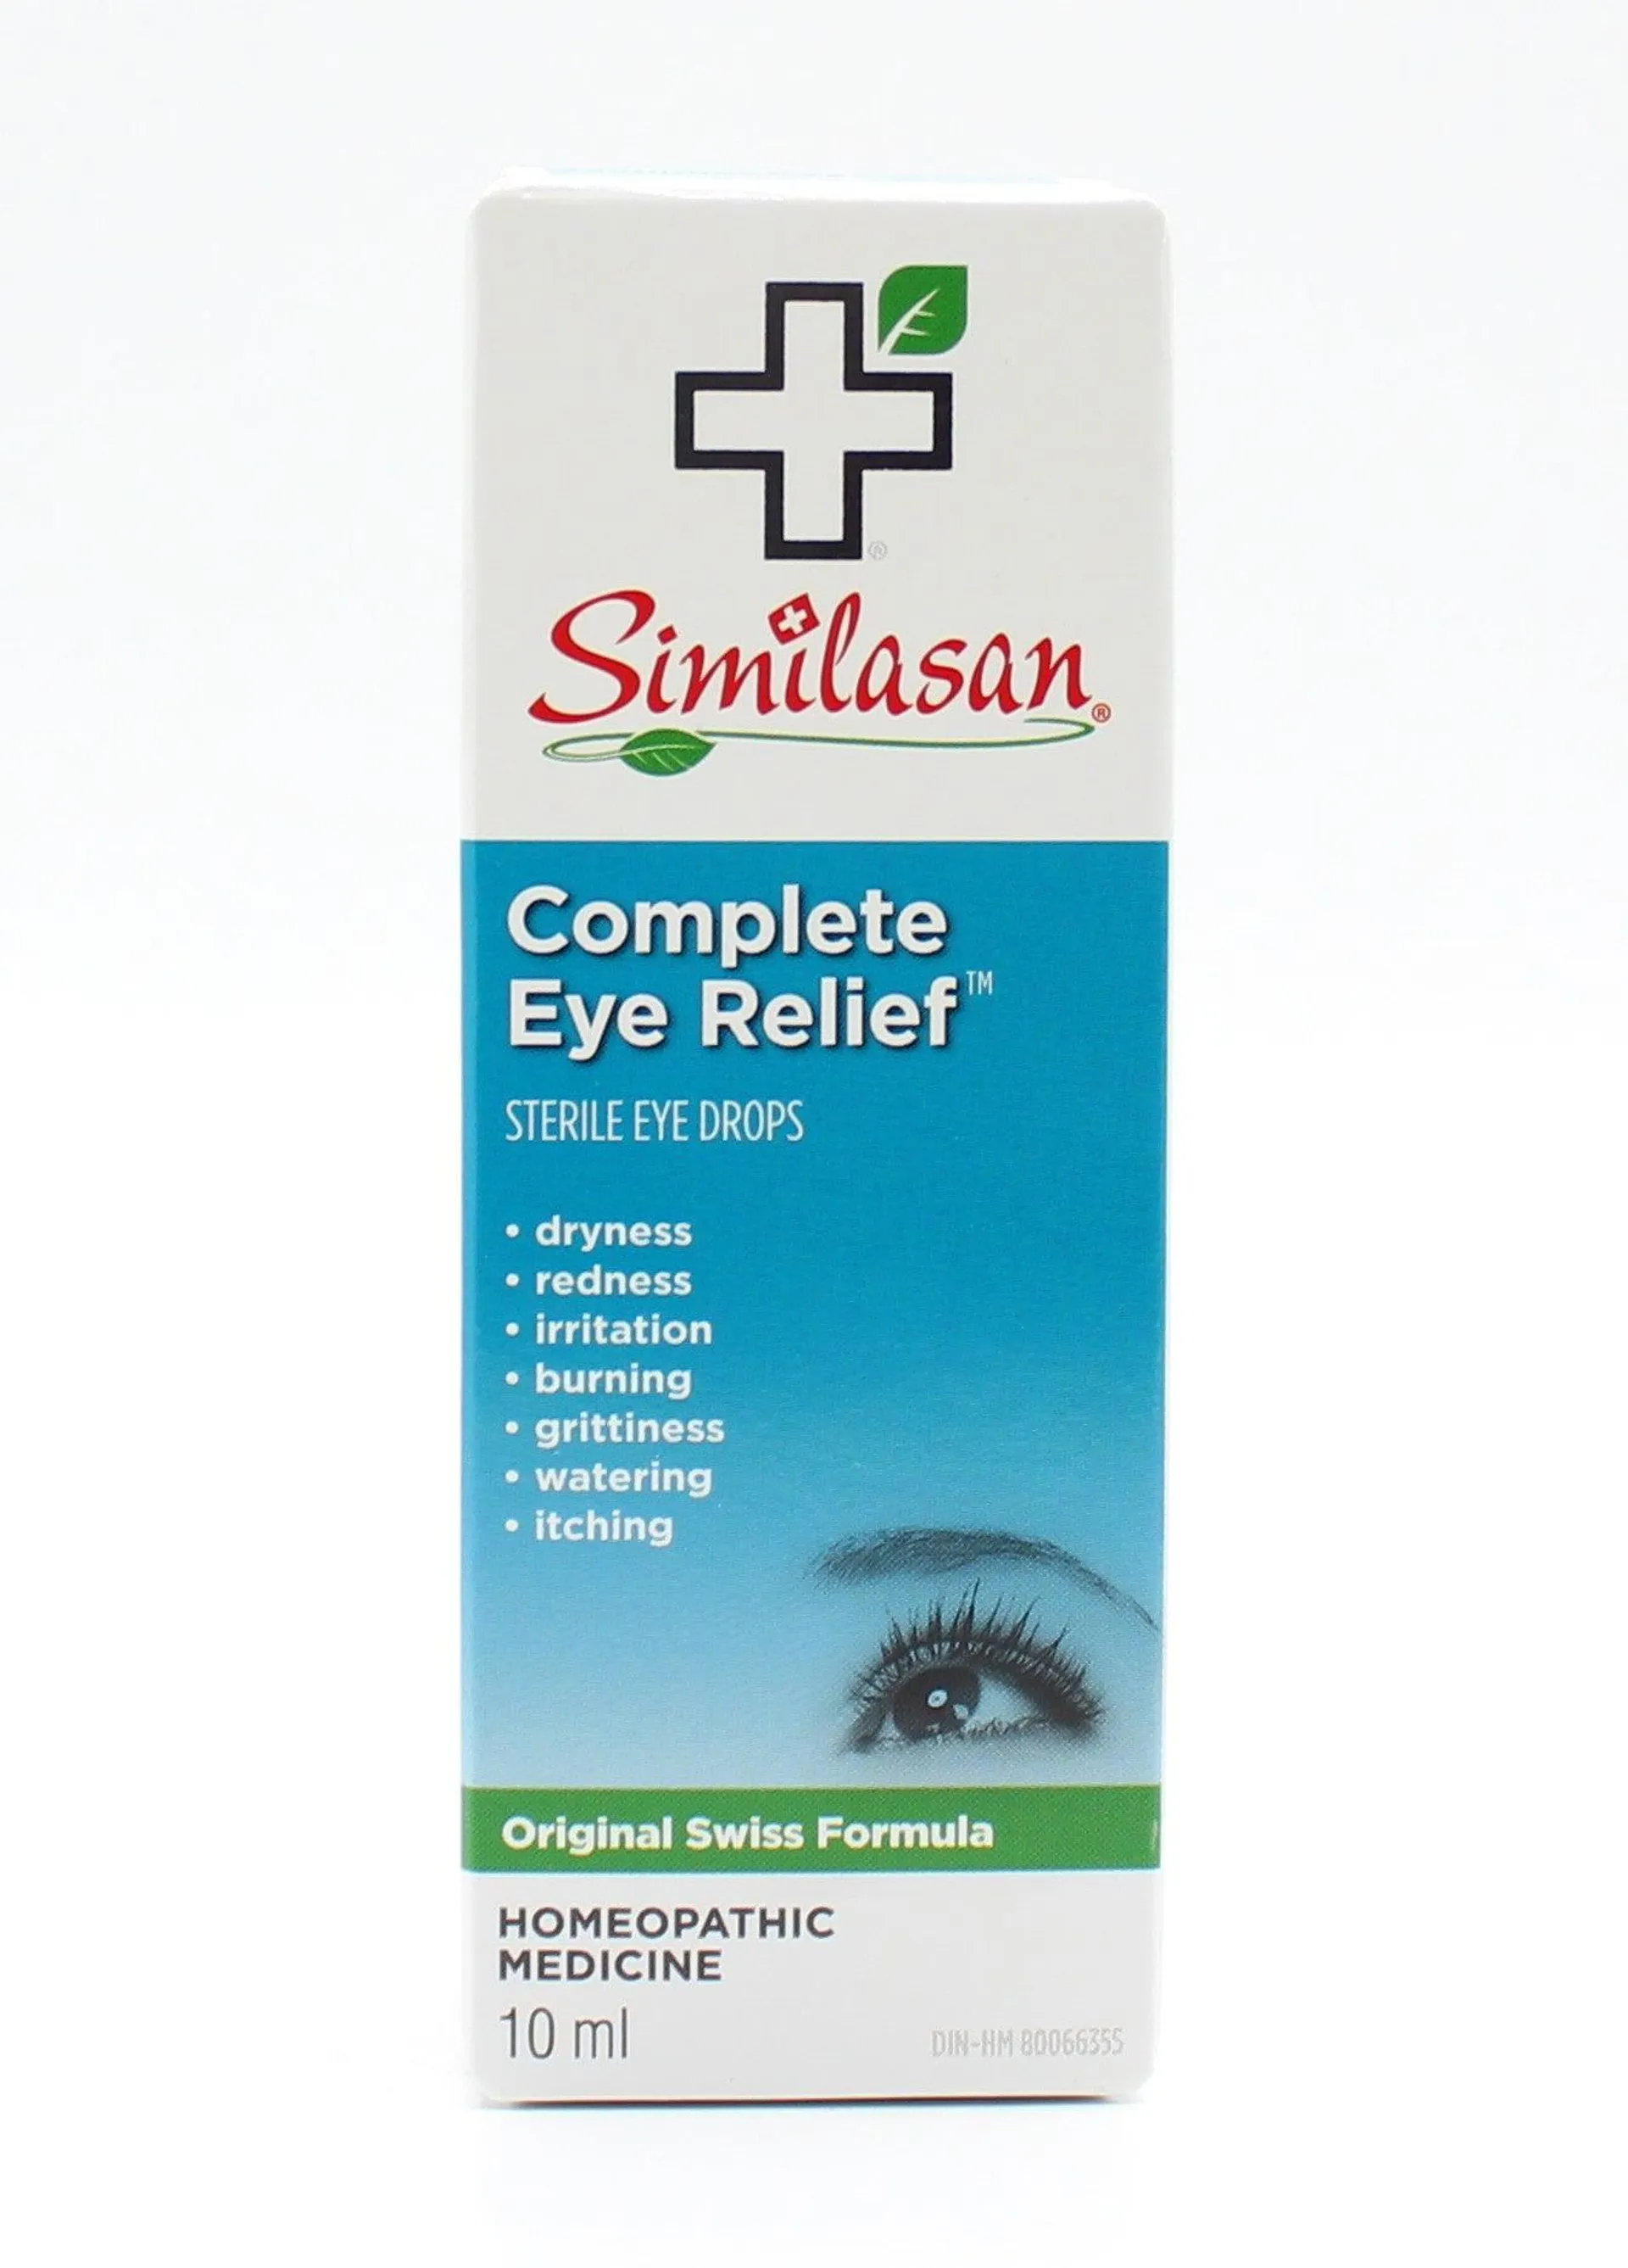 Complete Eye Relief